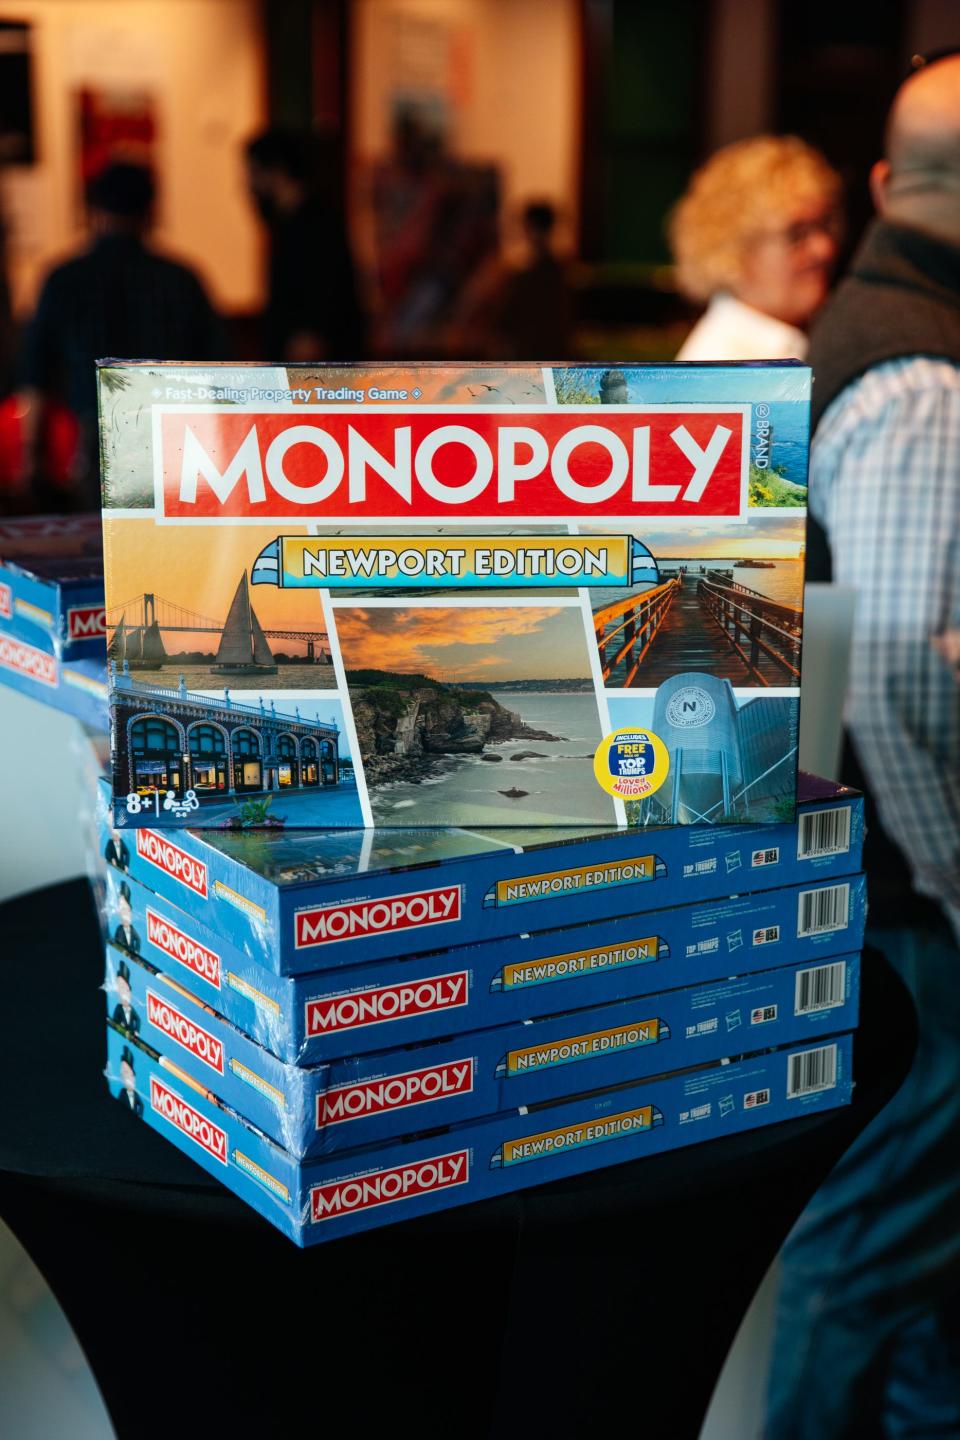 MONOPOLY: Newport Edition is now available in stores.